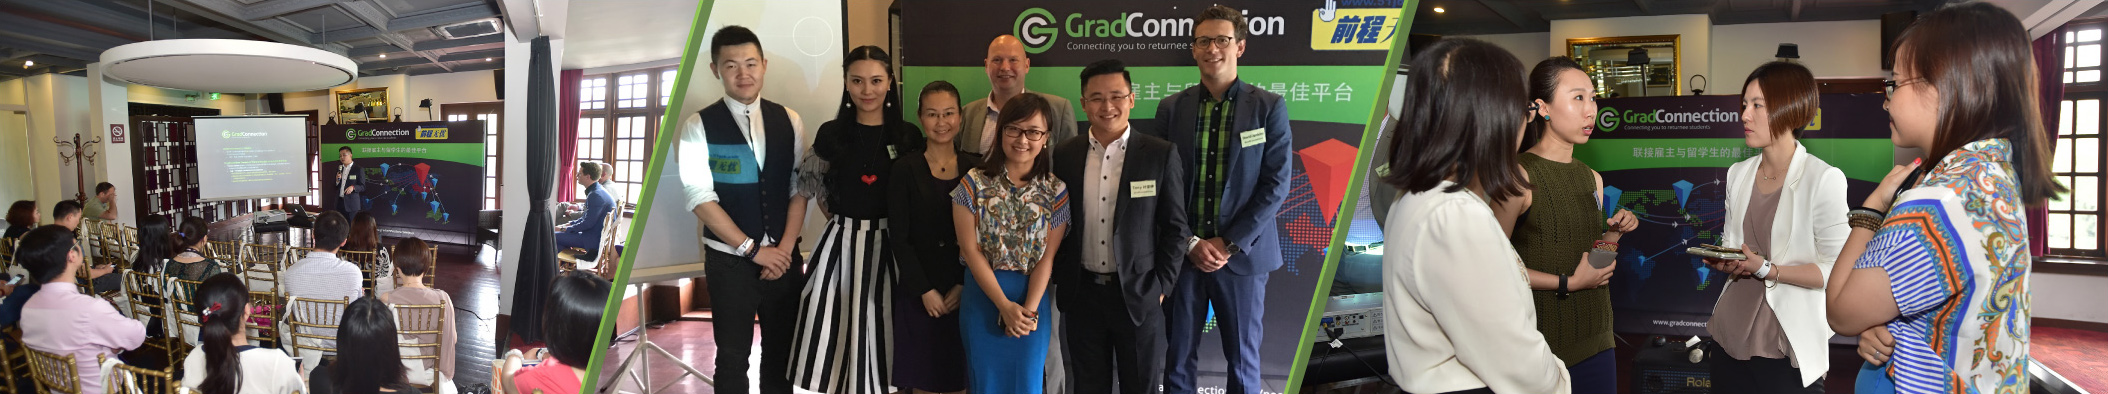 GradConnetion event collage